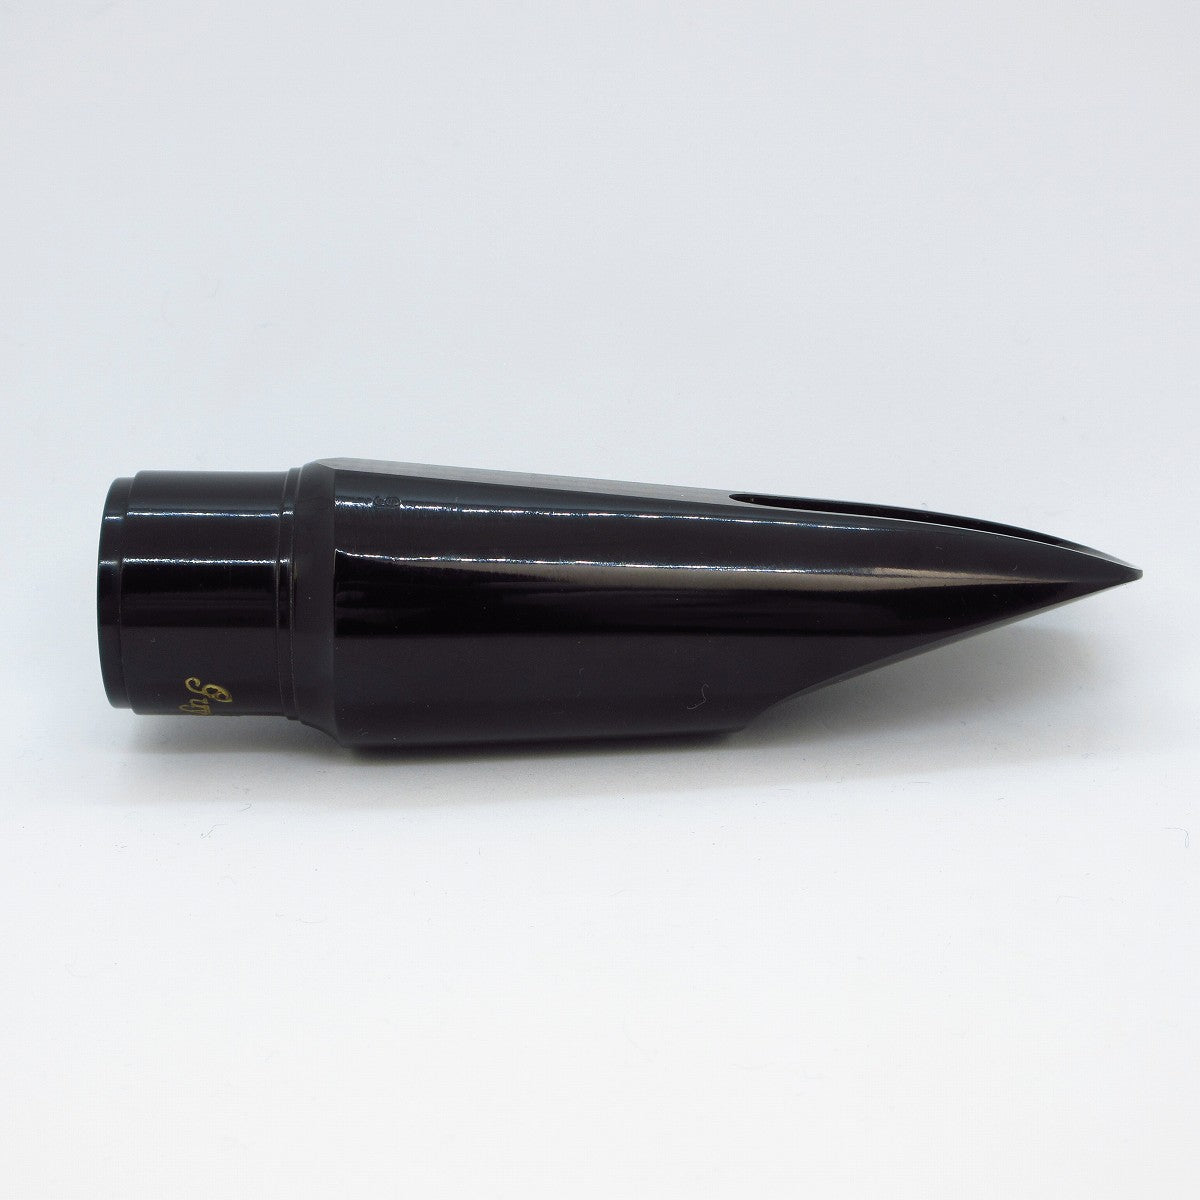 USED Guy Hawkins / Rubber 9 mouthpiece for tenor saxophone [09]